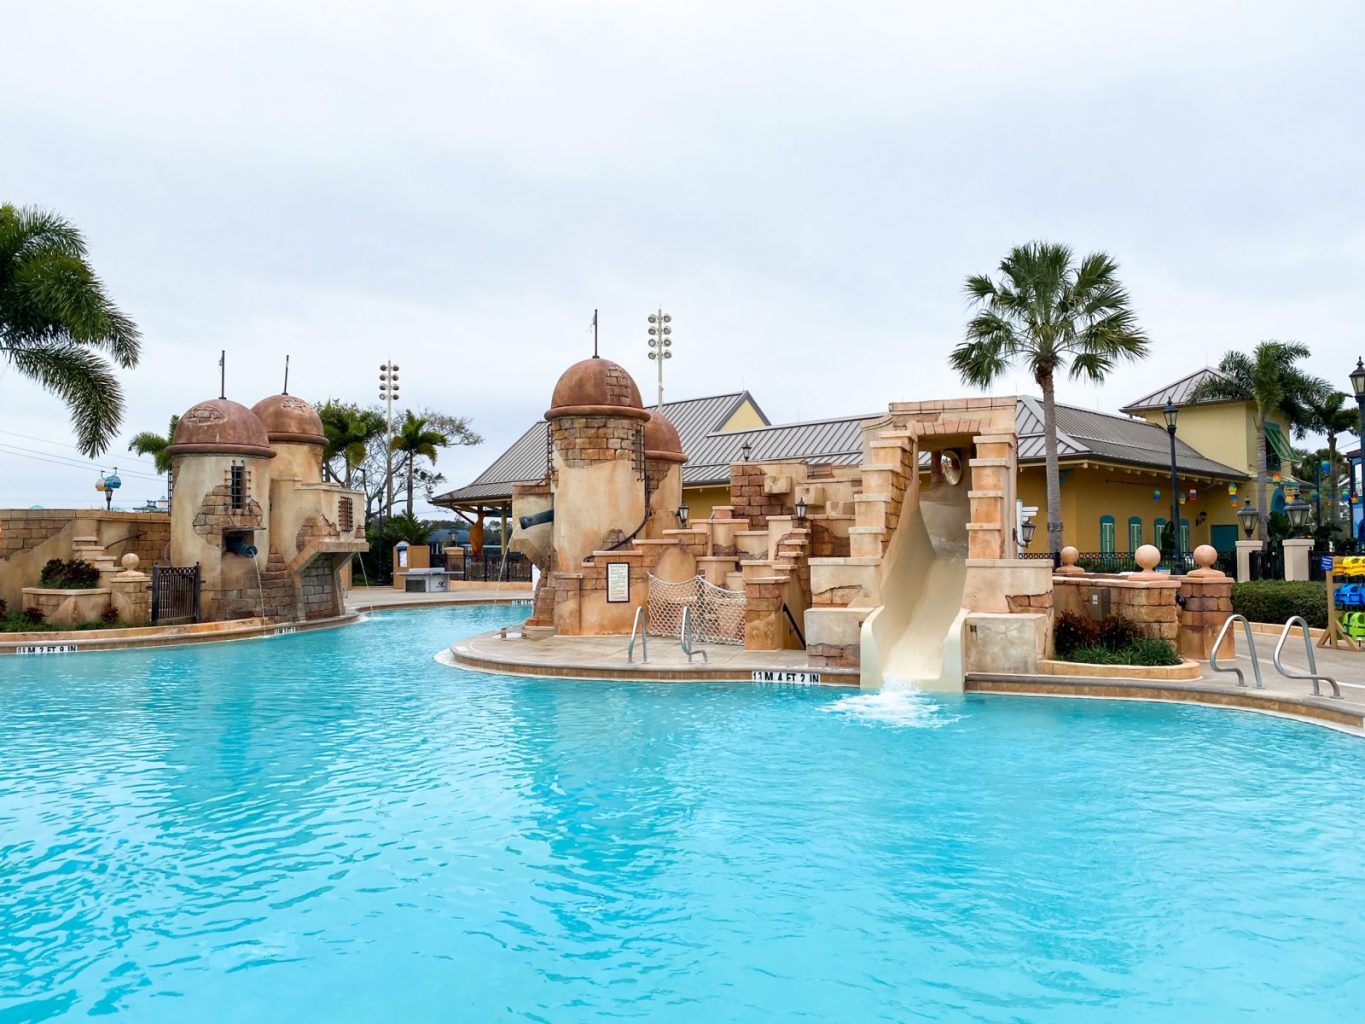 view of the large pool and one of the slides at Caribbean Beach Resort